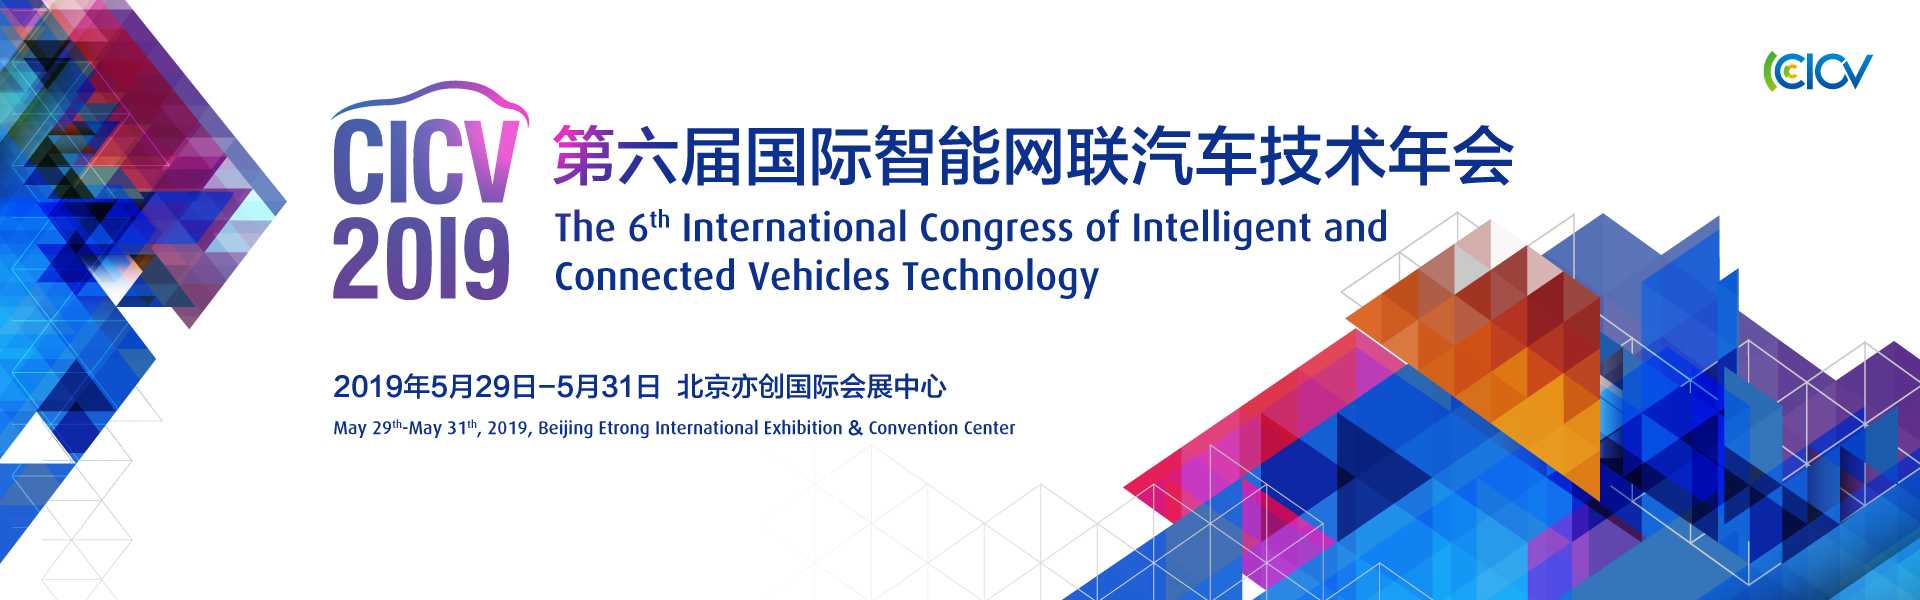 The 6th International Congress of Intelligent and Connected Vehicles Technology-Media